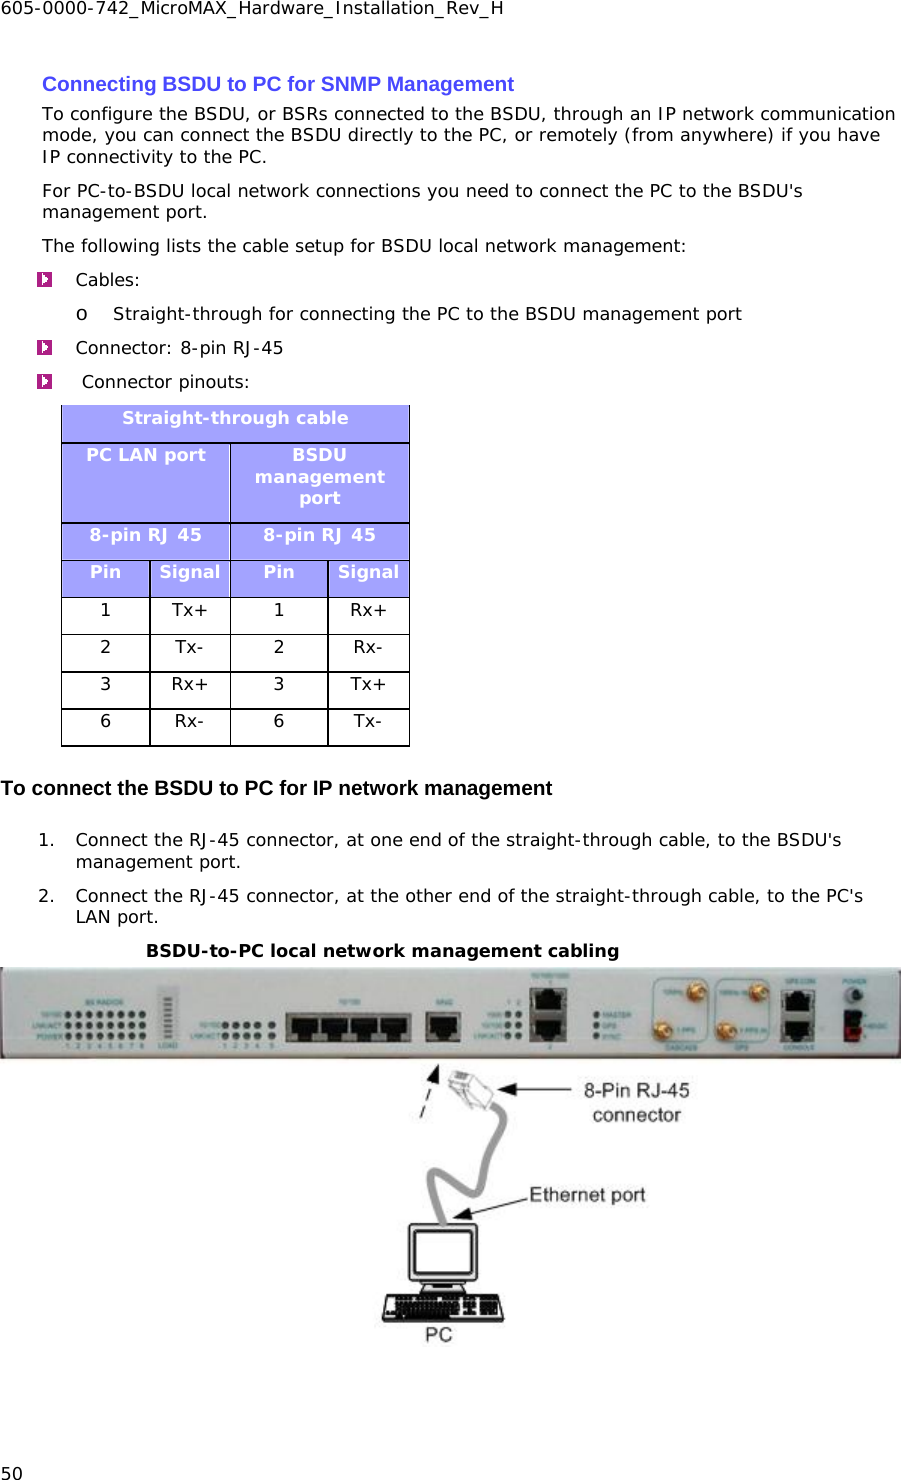 605-0000-742_MicroMAX_Hardware_Installation_Rev_H 50    Connecting BSDU to PC for SNMP Management To configure the BSDU, or BSRs connected to the BSDU, through an IP network communication mode, you can connect the BSDU directly to the PC, or remotely (from anywhere) if you have IP connectivity to the PC. For PC-to-BSDU local network connections you need to connect the PC to the BSDU&apos;s management port. The following lists the cable setup for BSDU local network management:  Cables:   o Straight-through for connecting the PC to the BSDU management port  Connector: 8-pin RJ-45    Connector pinouts:   Straight-through cable PC LAN port  BSDU management port 8-pin RJ 45  8-pin RJ 45 Pin  Signal  Pin  Signal 1 Tx+  1  Rx+ 2 Tx-  2  Rx- 3 Rx+  3  Tx+ 6 Rx-  6  Tx- To connect the BSDU to PC for IP network management 1. Connect the RJ-45 connector, at one end of the straight-through cable, to the BSDU&apos;s management port. 2. Connect the RJ-45 connector, at the other end of the straight-through cable, to the PC&apos;s LAN port. BSDU-to-PC local network management cabling  